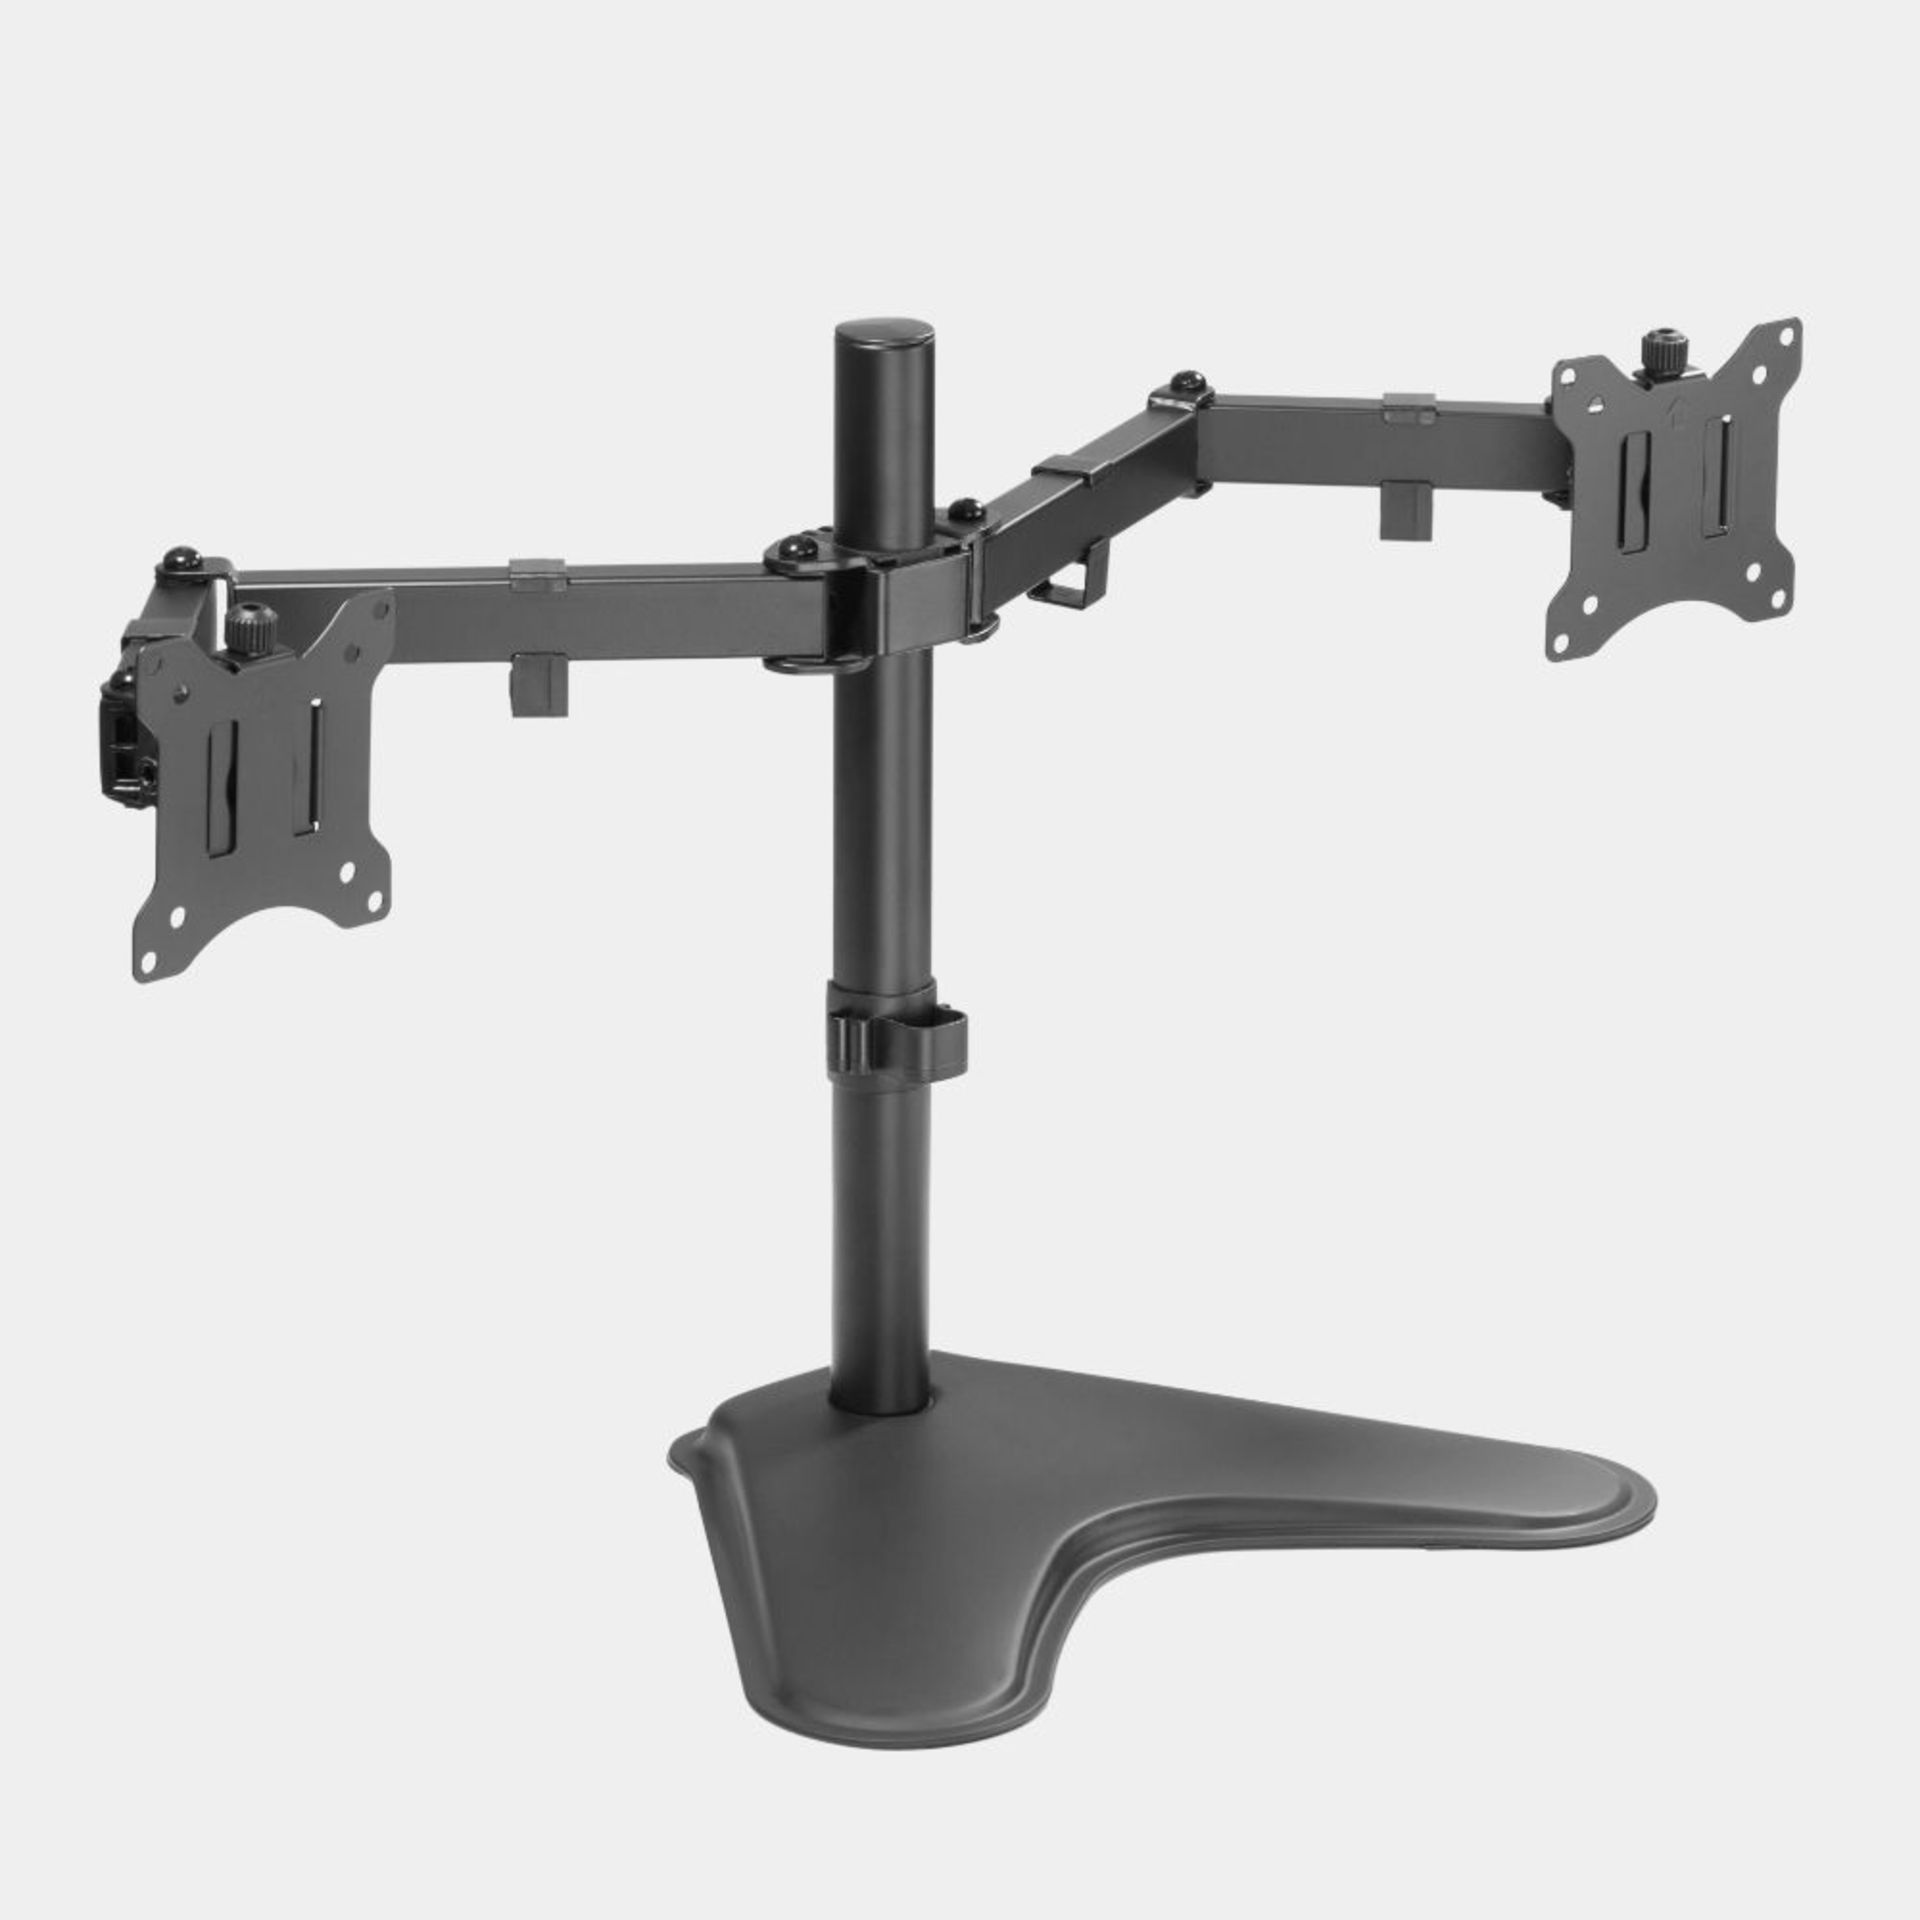 Dual Arm Desk Mount with Stand. Save valuable desk space and improve overall viewing with the luxury